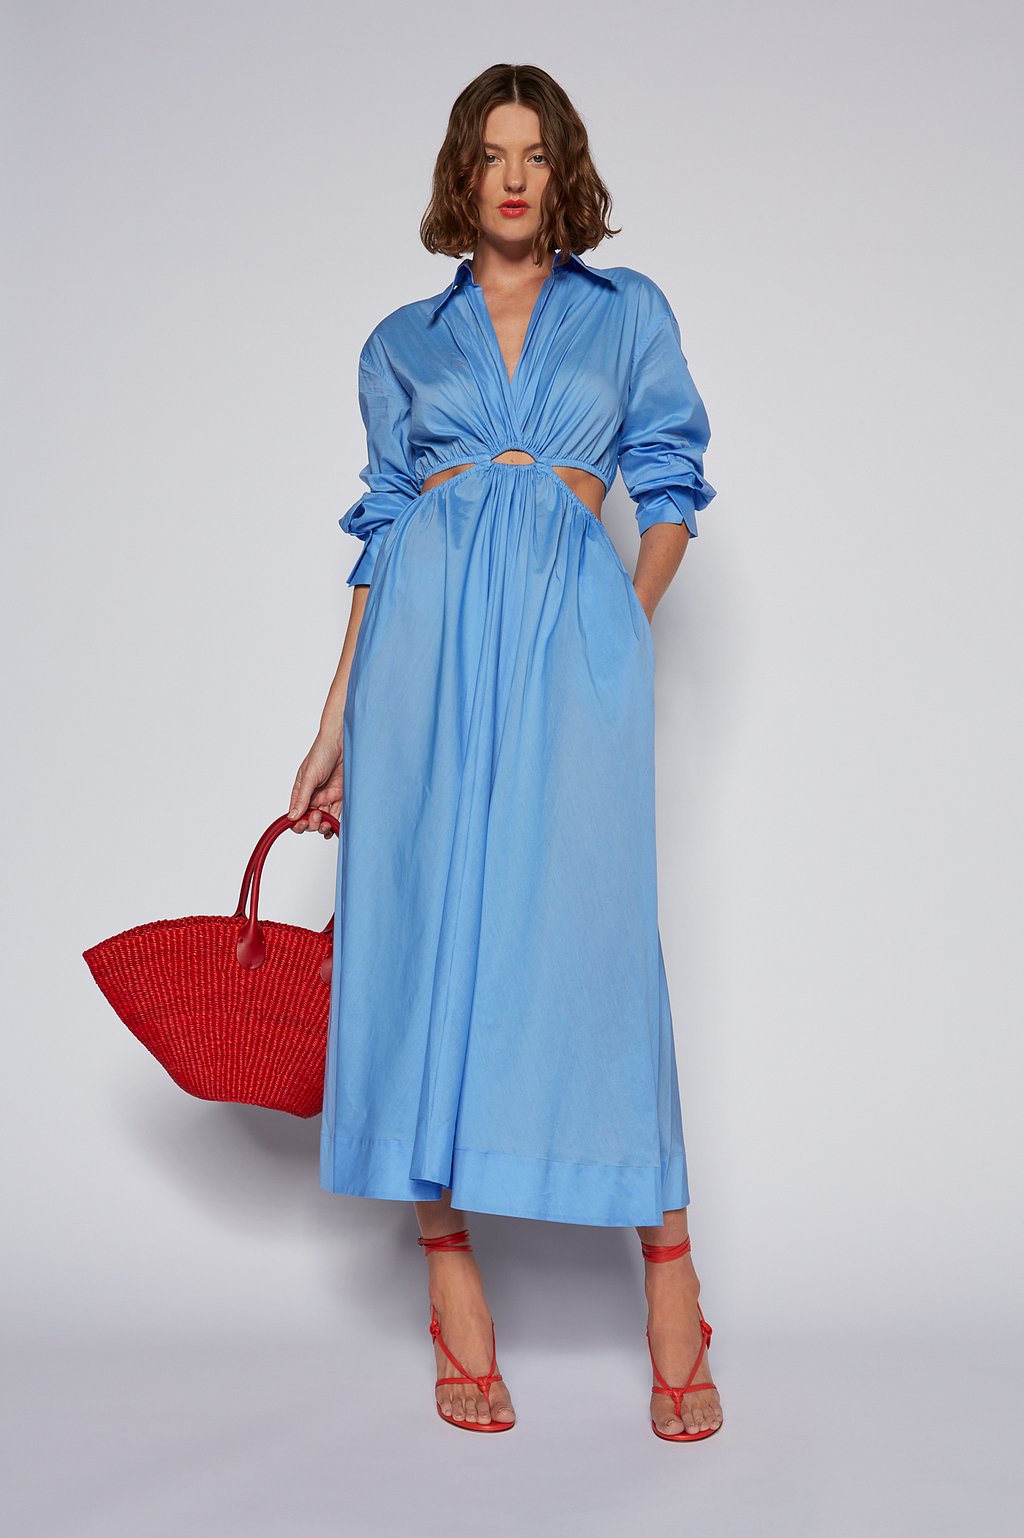 SCANLAN THEODORE - RING MIDI DRESS - BLUE Styled with red bag